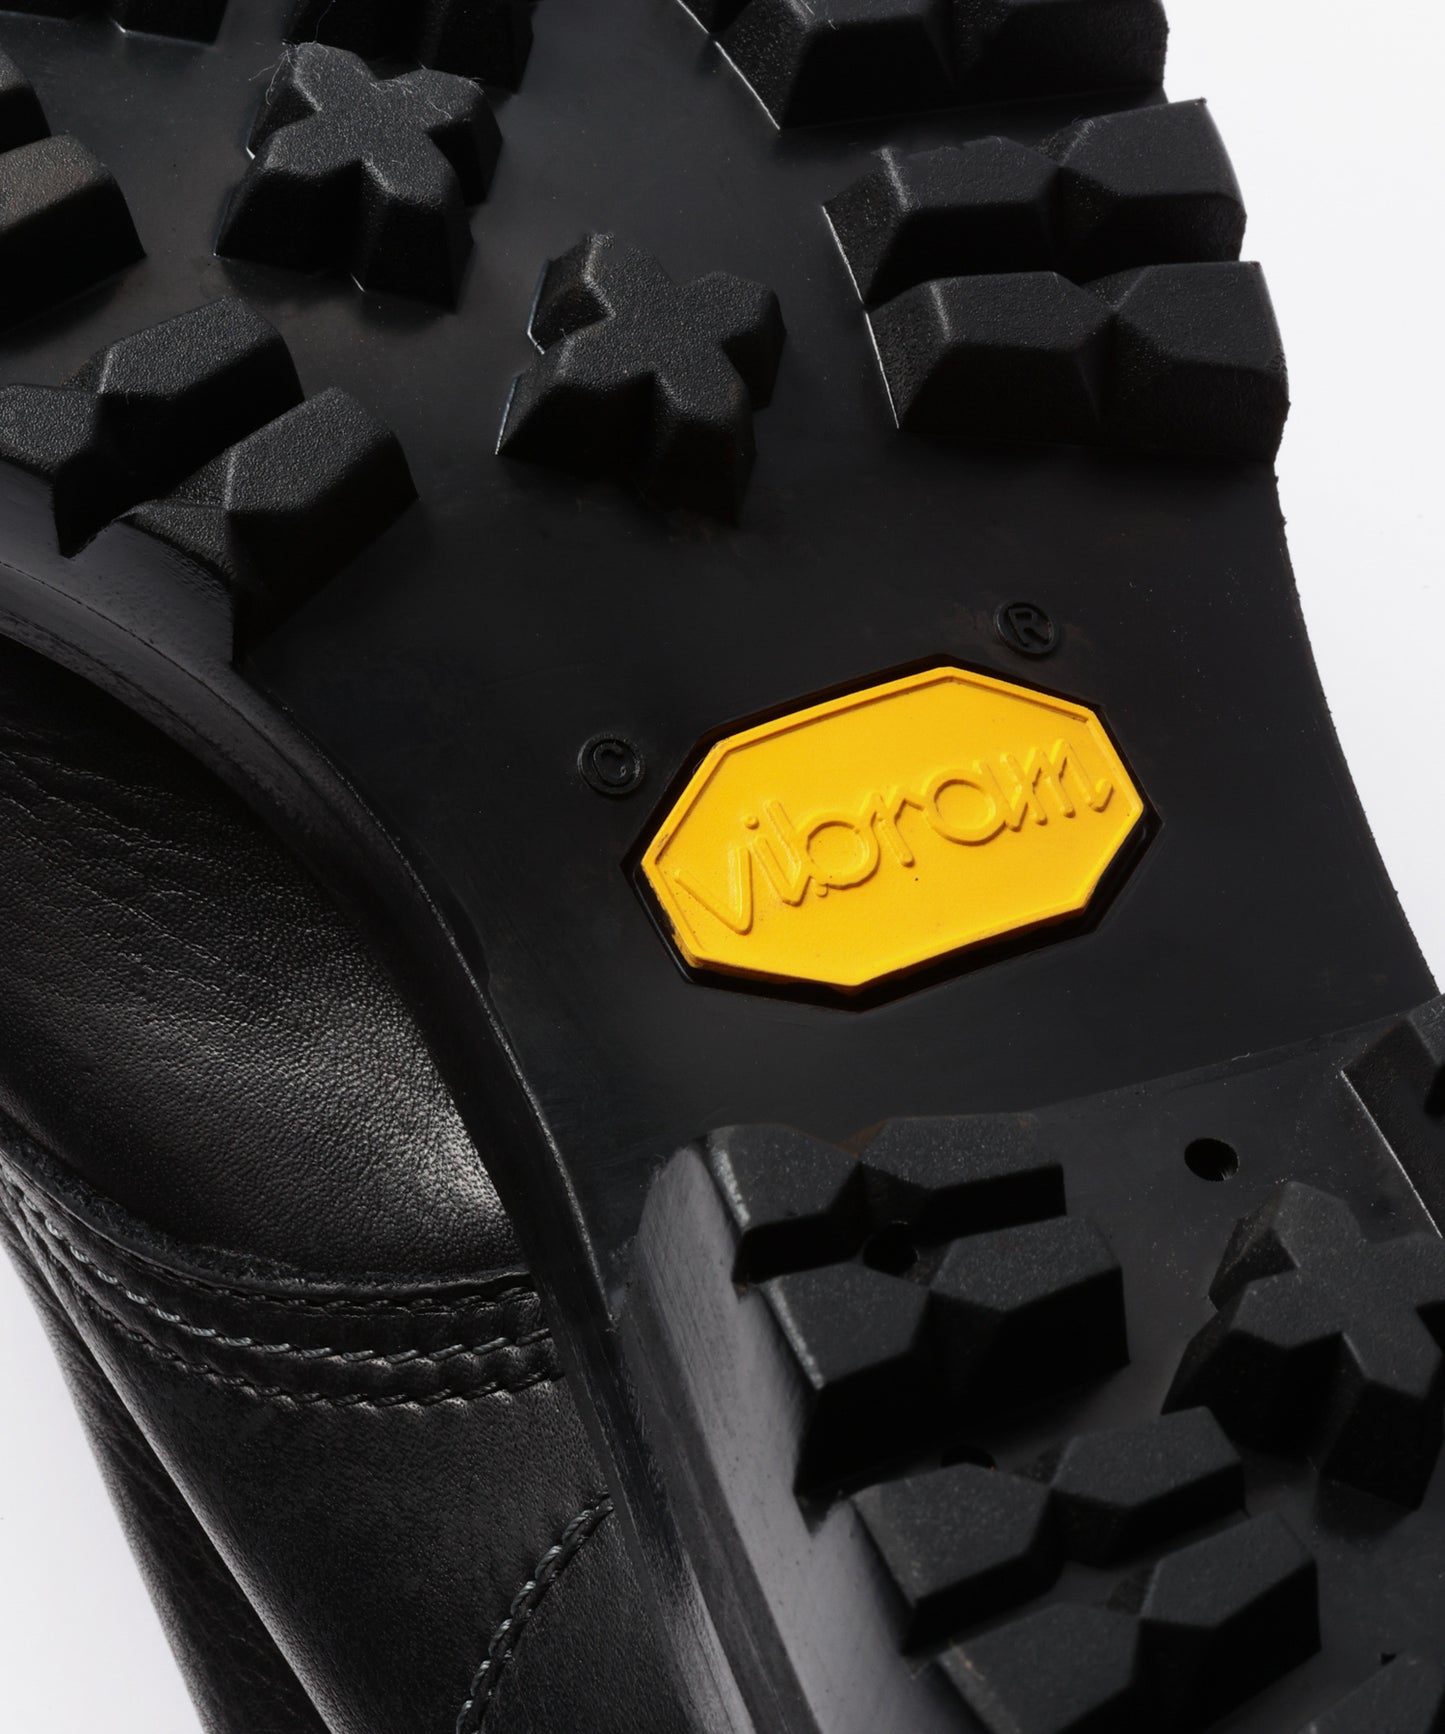 water proof shirink x vibram sole seven hole hunting boots